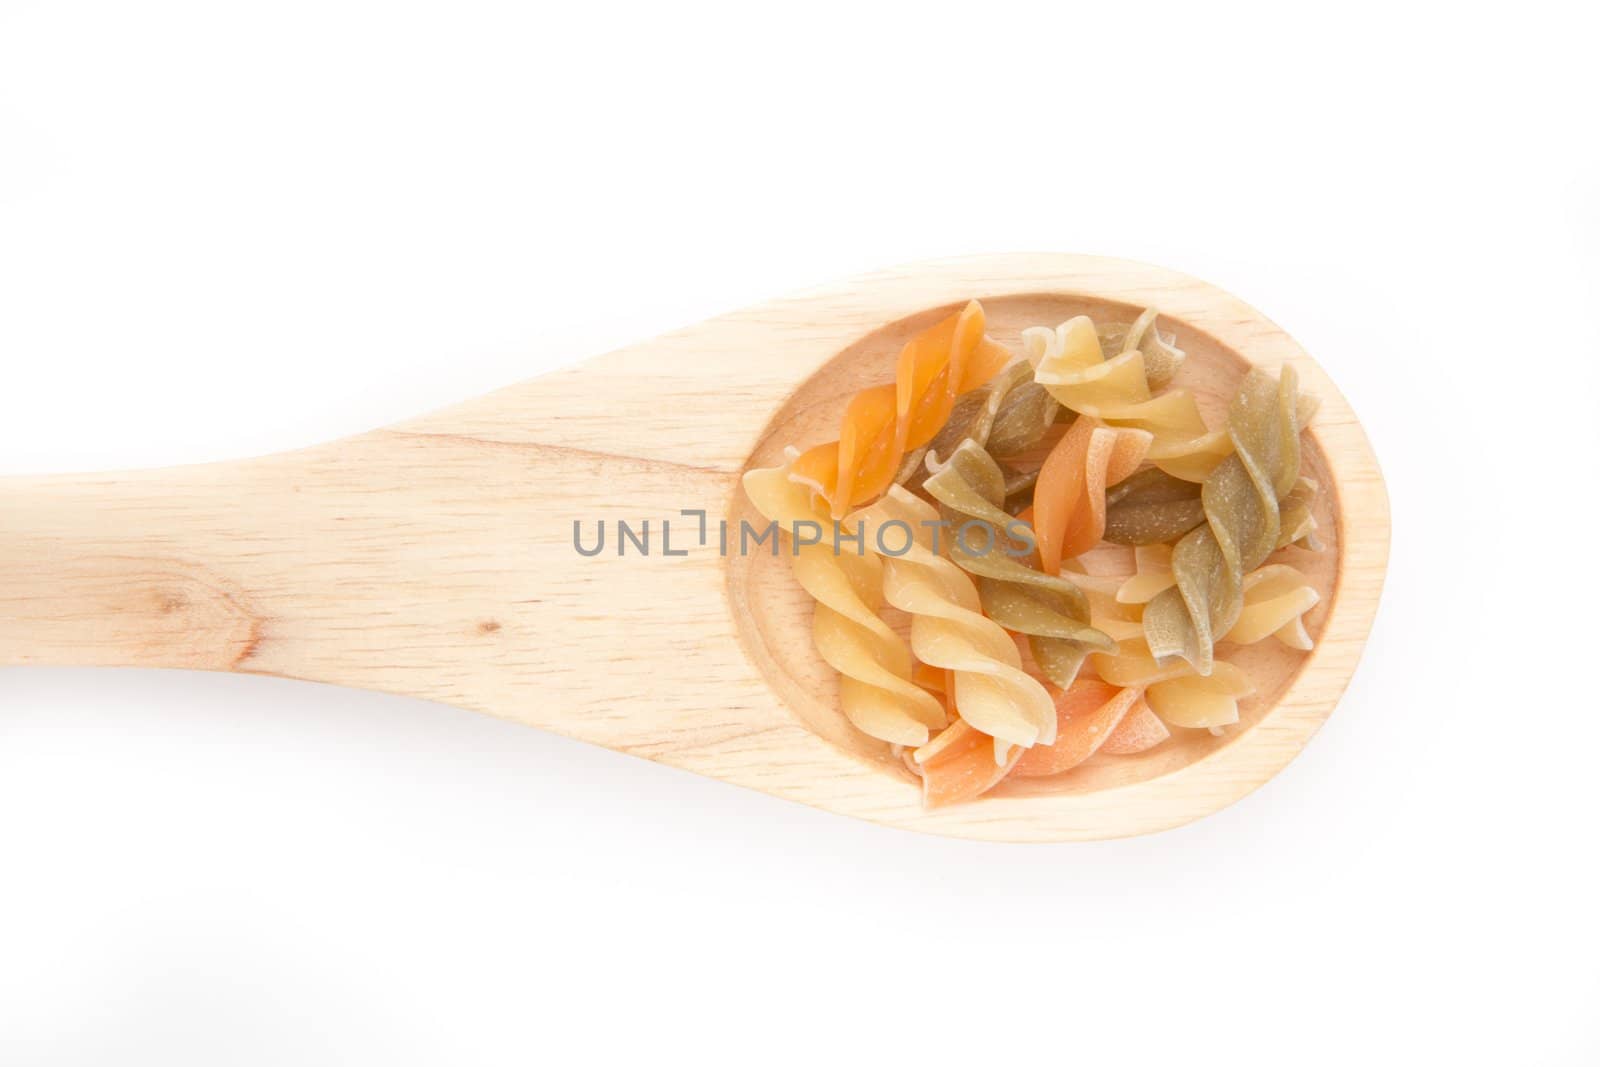 Wooden spoon with pasta by Wavebreakmedia